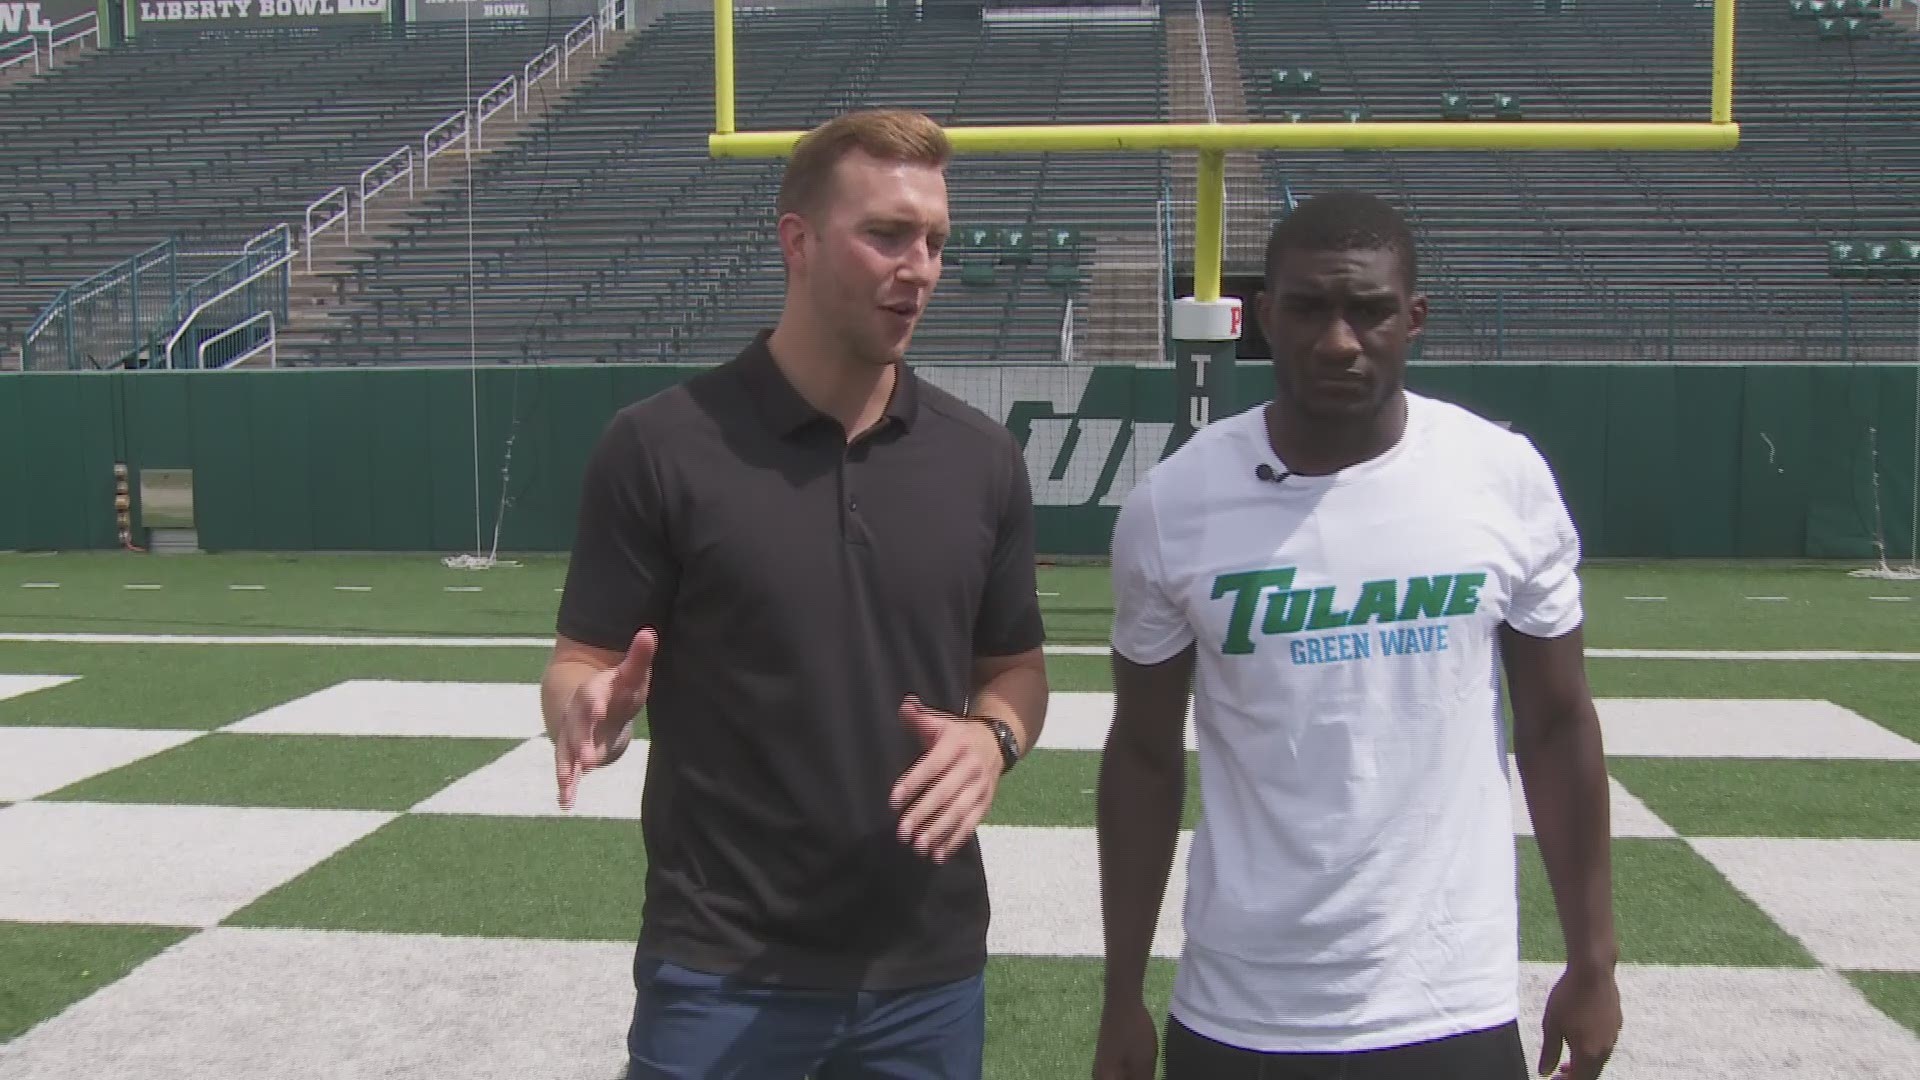 Eyewitness Sports caught up with Green Wave running back Corey Dauphine this week.